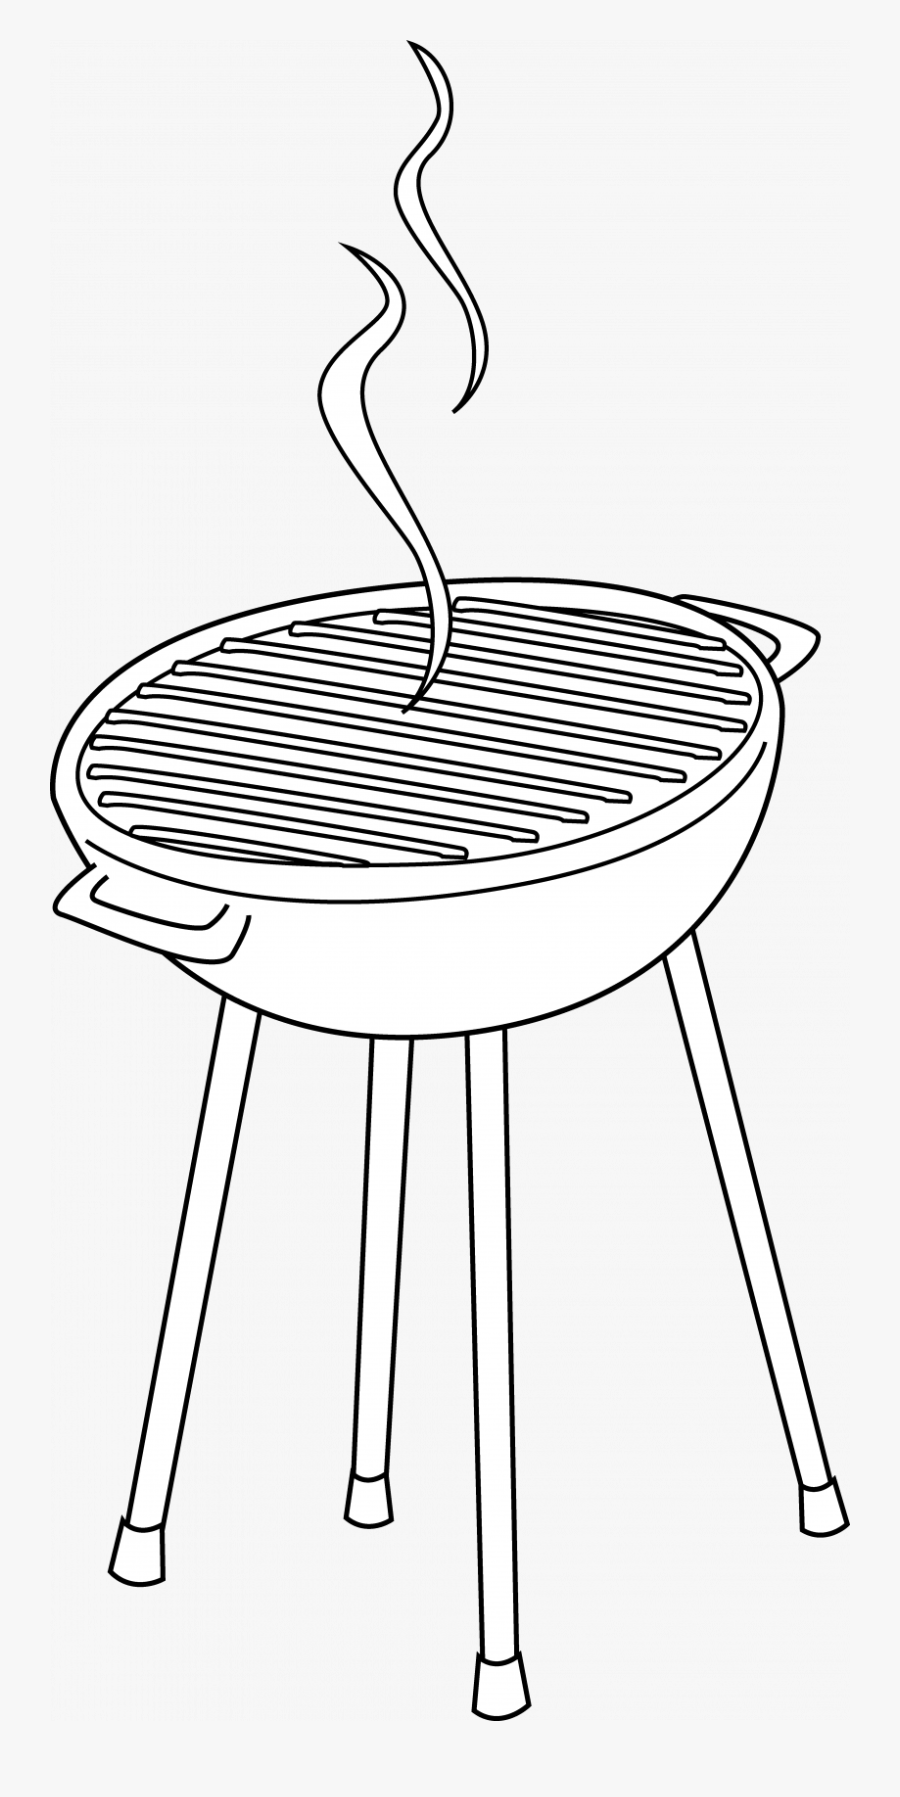 Barbeque Grill Clip Art Free - Black And White Clip Art Grill, Transparent Clipart